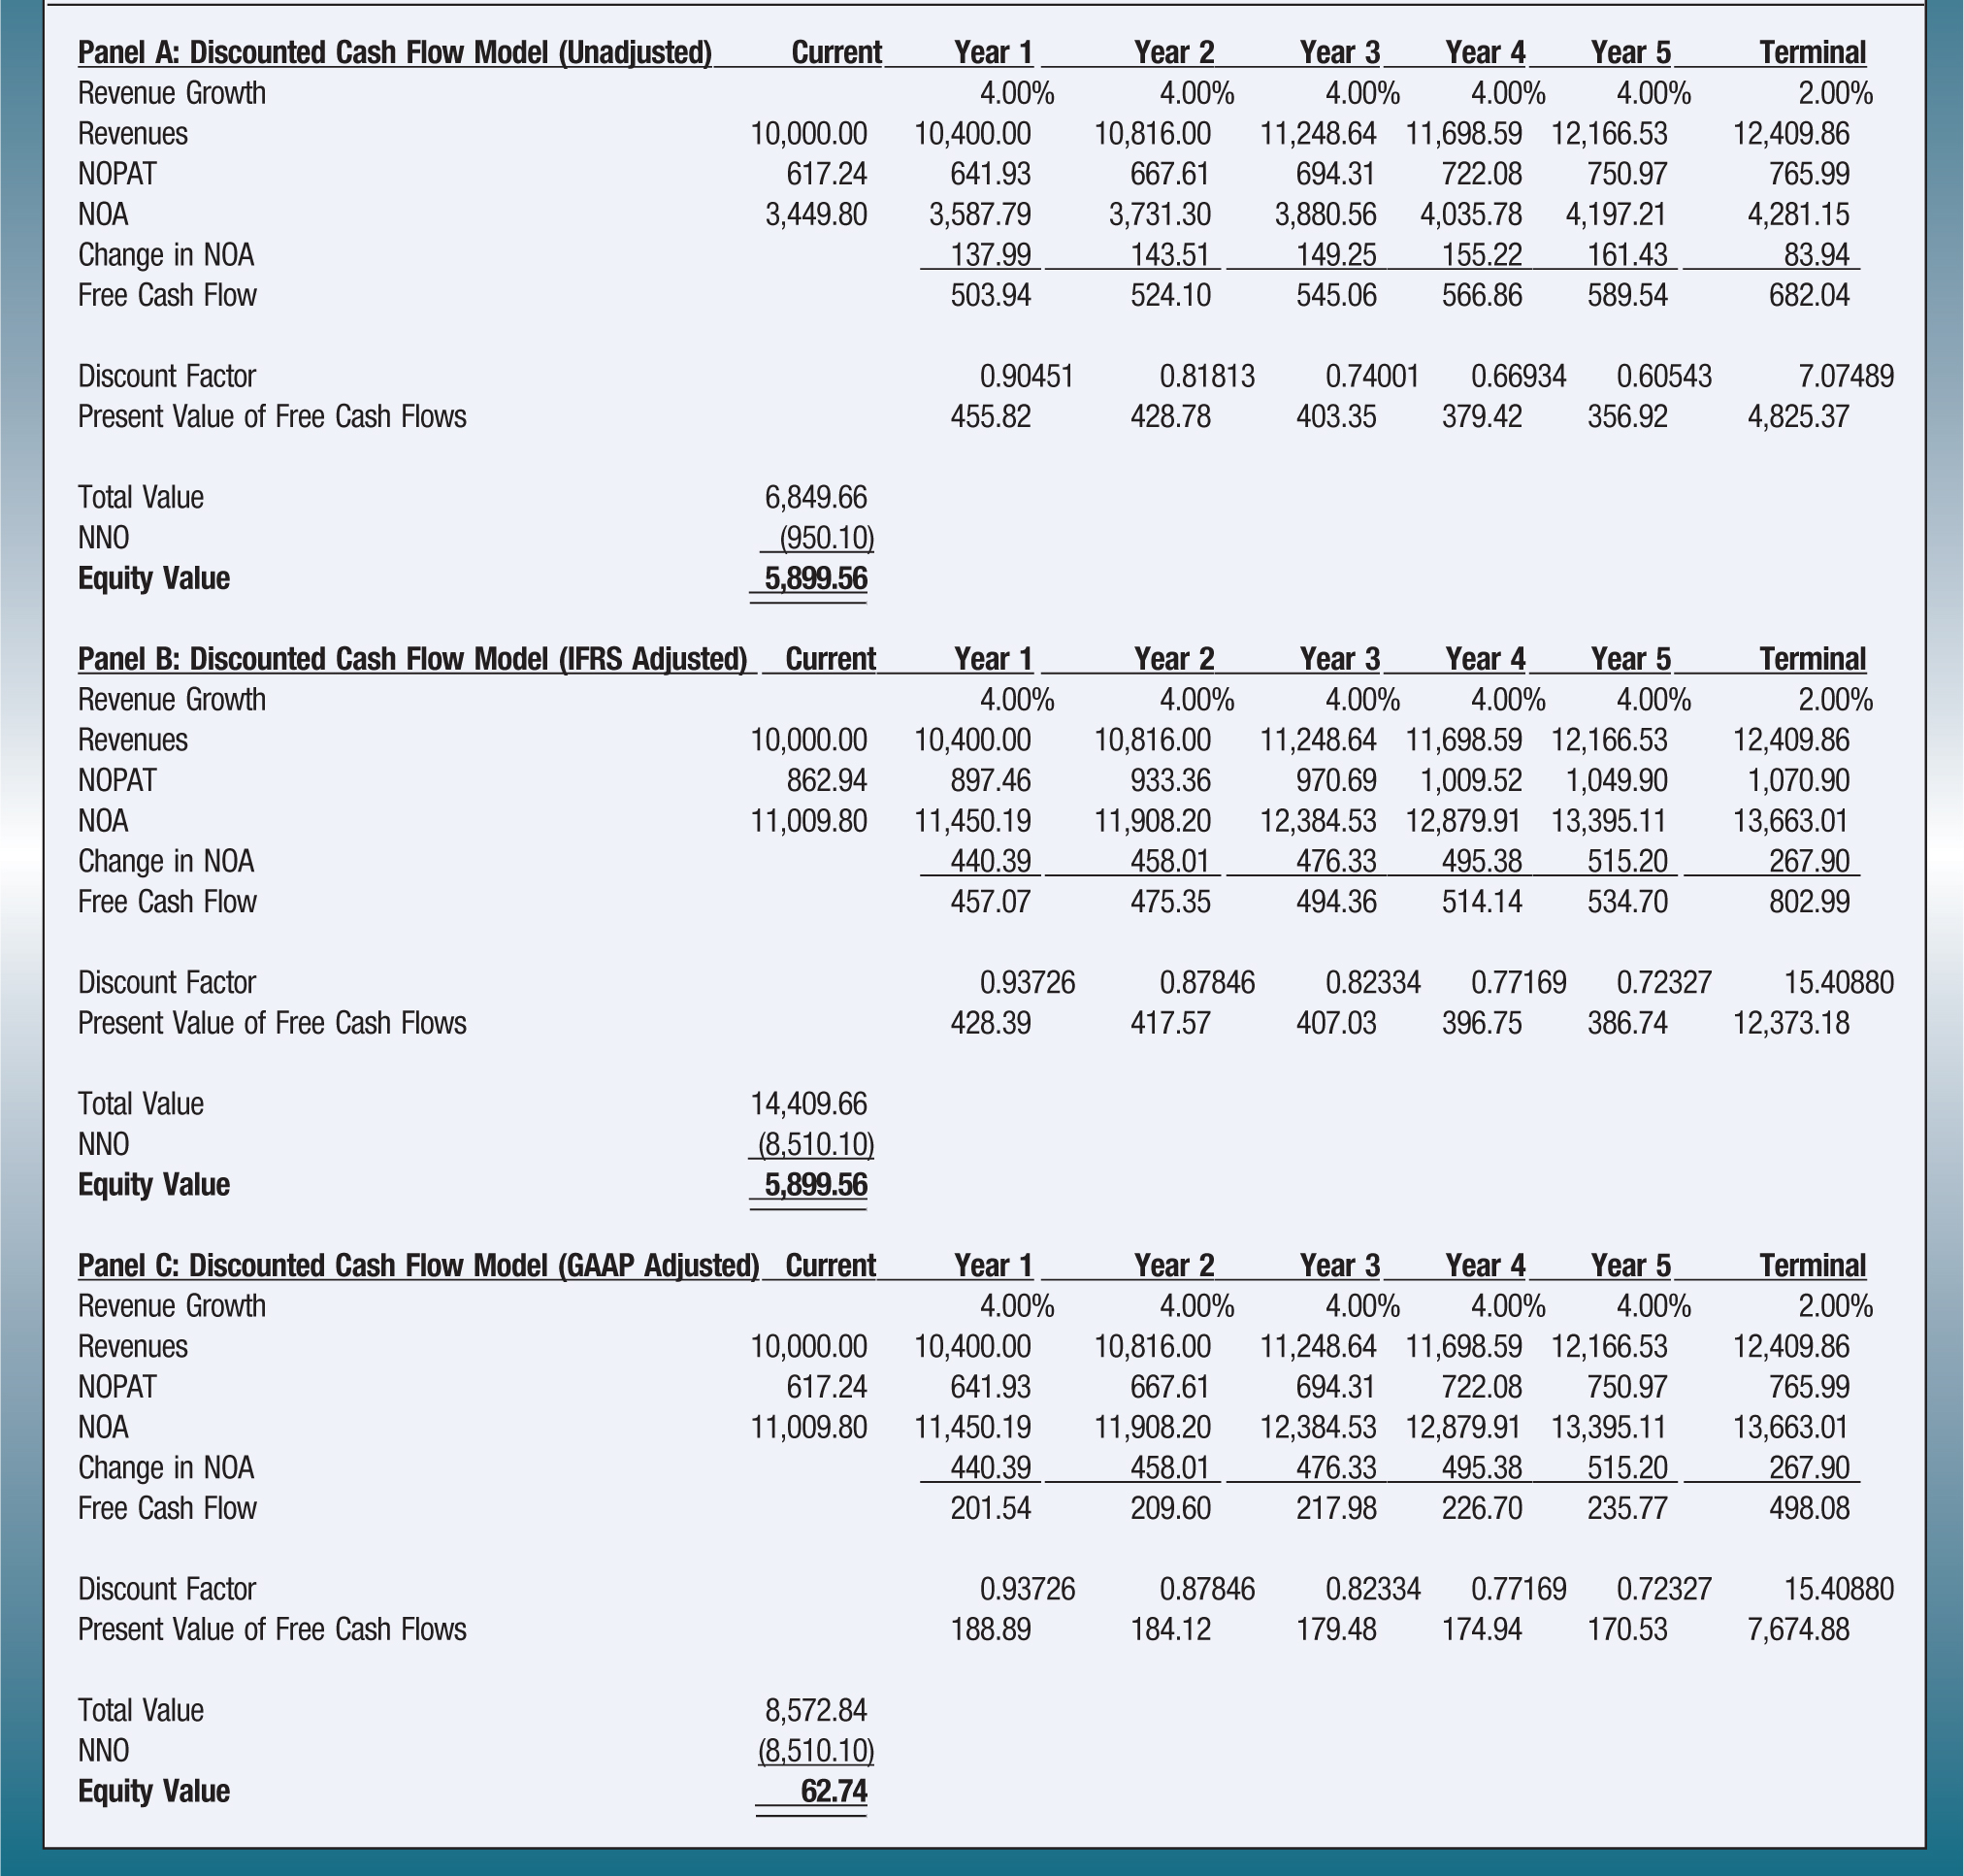 Panel A: Discounted Cash Flow Model (Unadjusted); Current; Year 1; Year 2; Year 3; Year 4; Year 5; Terminal Revenue Growth; 4.00%; 4.00%; 4.00%; 4.00%; 4.00%; 2.00% Revenues; 10,000.00; 10,400.00; 10,816.00; 11,248.64; 11,698.59; 12,166.53; 12,409.86 NOPAT; 617.24; 641.93; 667.61; 694.31; 722.08; 750.97; 765.99 NOA; 3,449.80; 3,587.79; 3,731.30; 3,880.56; 4,035.78; 4,197.21; 4,281.15 Change in NOA; 137.99; 143.51; 149.25; 155.22; 161.43; 83.94 Free Cash Flow; 503.94; 524.10; 545.06; 566.86; 589.54; 682.04 Discount Factor; 0.90451; 0.81813; 0.74001; 0.66934; 0.60543; 7.07489 Present Value of Free Cash Flows; 455.82; 428.78; 403.35; 379.42; 356.92; 4,825.37 Total Value; 6,849.66 NNO; (950.10) Equity Value; 5,899.56 Panel B: Discounted Cash Flow Model (IFRS Adjusted); Current; Year 1; Year 2; Year 3; Year 4; Year 5; Terminal Revenue Growth; 4.00%; 4.00%; 4.00%; 4.00%; 4.00%; 2.00% Revenues; 10,000.00; 10,400.00; 10,816.00; 11,248.64; 11,698.59; 12,166.53; 12,409.86 NOPAT; 862.94; 897.46; 933.36; 970.69; 1,009.52; 1,049.90; 1,070.90 NOA; 11,009.80; 11,450.19; 11,908.20; 12,384.53; 12,879.91; 13,395.11; 13,663.01 Change in NOA; 440.39; 458.01; 476.33; 495.38; 515.20; 267.90 Free Cash Flow; 457.07; 475.35; 494.36; 514.14; 534.70; 802.99 Discount Factor; 0.93726; 0.87846; 0.82334; 0.77169; 0.72327; 15.40880 Present Value of Free Cash Flows; 428.39; 417.57; 407.03; 396.75; 386.74; 12,373.18 Total Value; 14,409.66 NNO; (8,510.10) Equity Value; 5,899.56 Panel C: Discounted Cash Flow Model (GAAP Adjusted); Current; Year 1; Year 2; Year 3; Year 4; Year 5; Terminal Revenue Growth; 4.00%; 4.00%; 4.00%; 4.00%; 4.00%; 2.00% Revenues; 10,000.00; 10,400.00; 10,816.00; 11,248.64; 11,698.59; 12,166.53; 12,409.86 NOPAT; 617.24; 641.93; 667.61; 694.31; 722.08; 750.97; 765.99 NOA; 11,009.80; 11,450.19; 11,908.20; 12,384.53; 12,879.91; 13,395.11; 13,663.01 Change in NOA; 440.39; 458.01; 476.33; 495.38; 515.20; 267.90 Free Cash Flow; 201.54; 209.60; 217.98; 226.70; 235.77; 498.08 Discount Factor; 0.93726; 0.87846; 0.82334; 0.77169; 0.72327; 15.40880 Present Value of Free Cash Flows; 188.89; 184.12; 179.48; 174.94; 170.53; 7,674.88 Total Value; 8,572.84 NNO; (8,510.10) Equity Value; 62.74